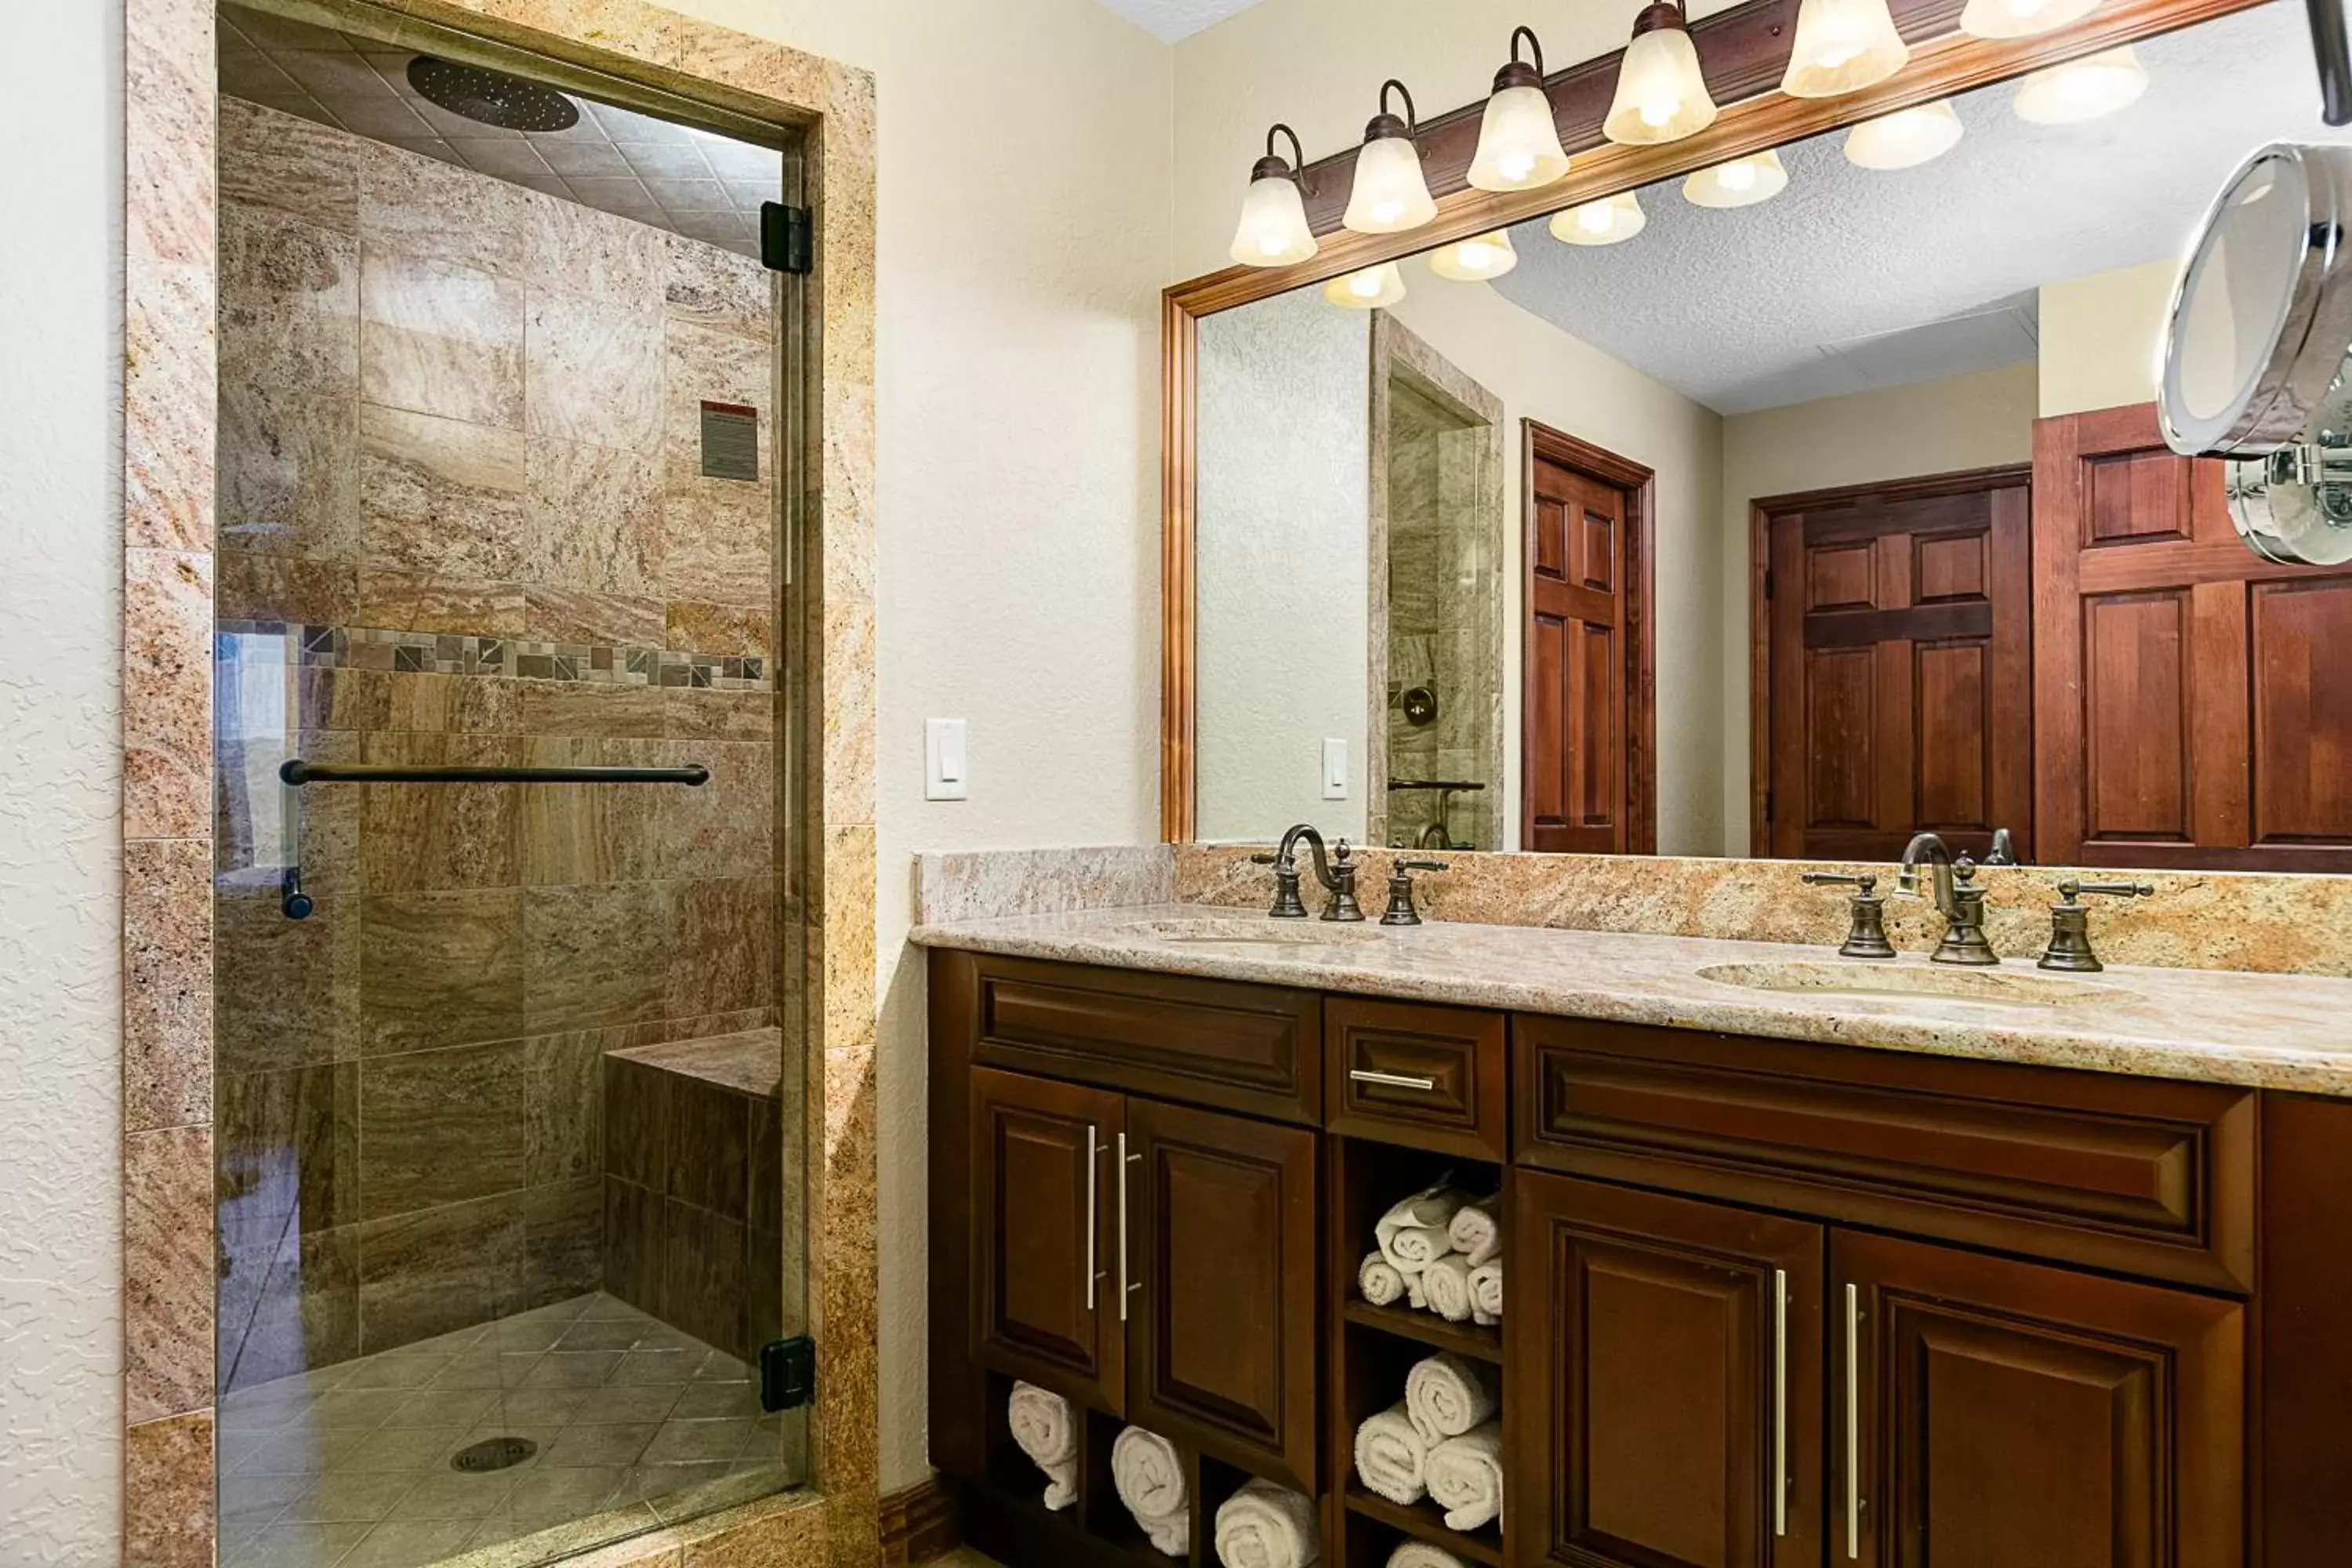 Bathroom in Condos at Canyons Resort by White Pines